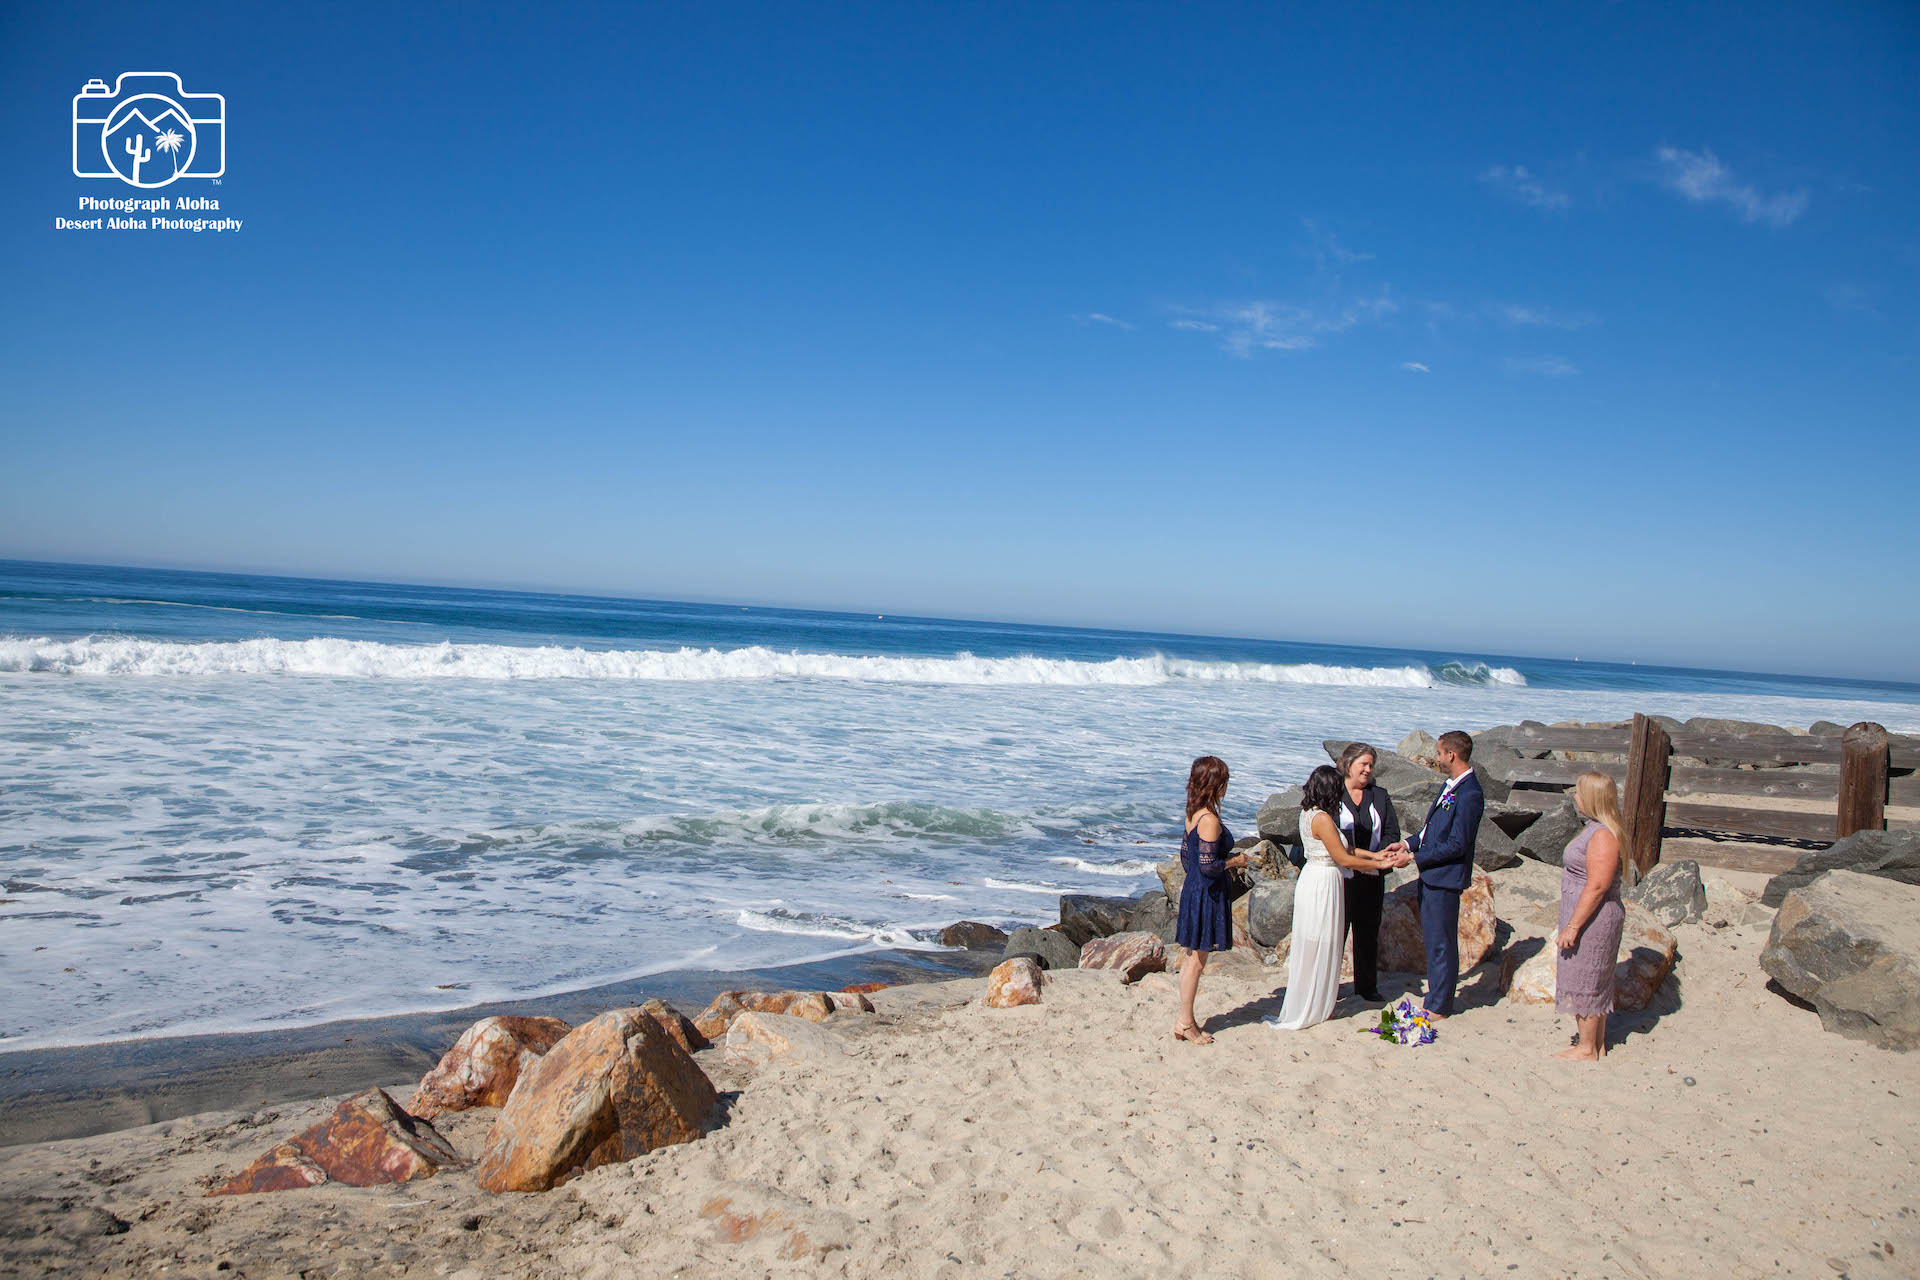 Elope to Oceanside - www.elopetooceanside.com | PHOTO: ©Photograph Aloha www.photographaloha.com - All Rights Reserved | Elope to Oceanside is a service of Elope to San Diego™ and Vows From The Heart